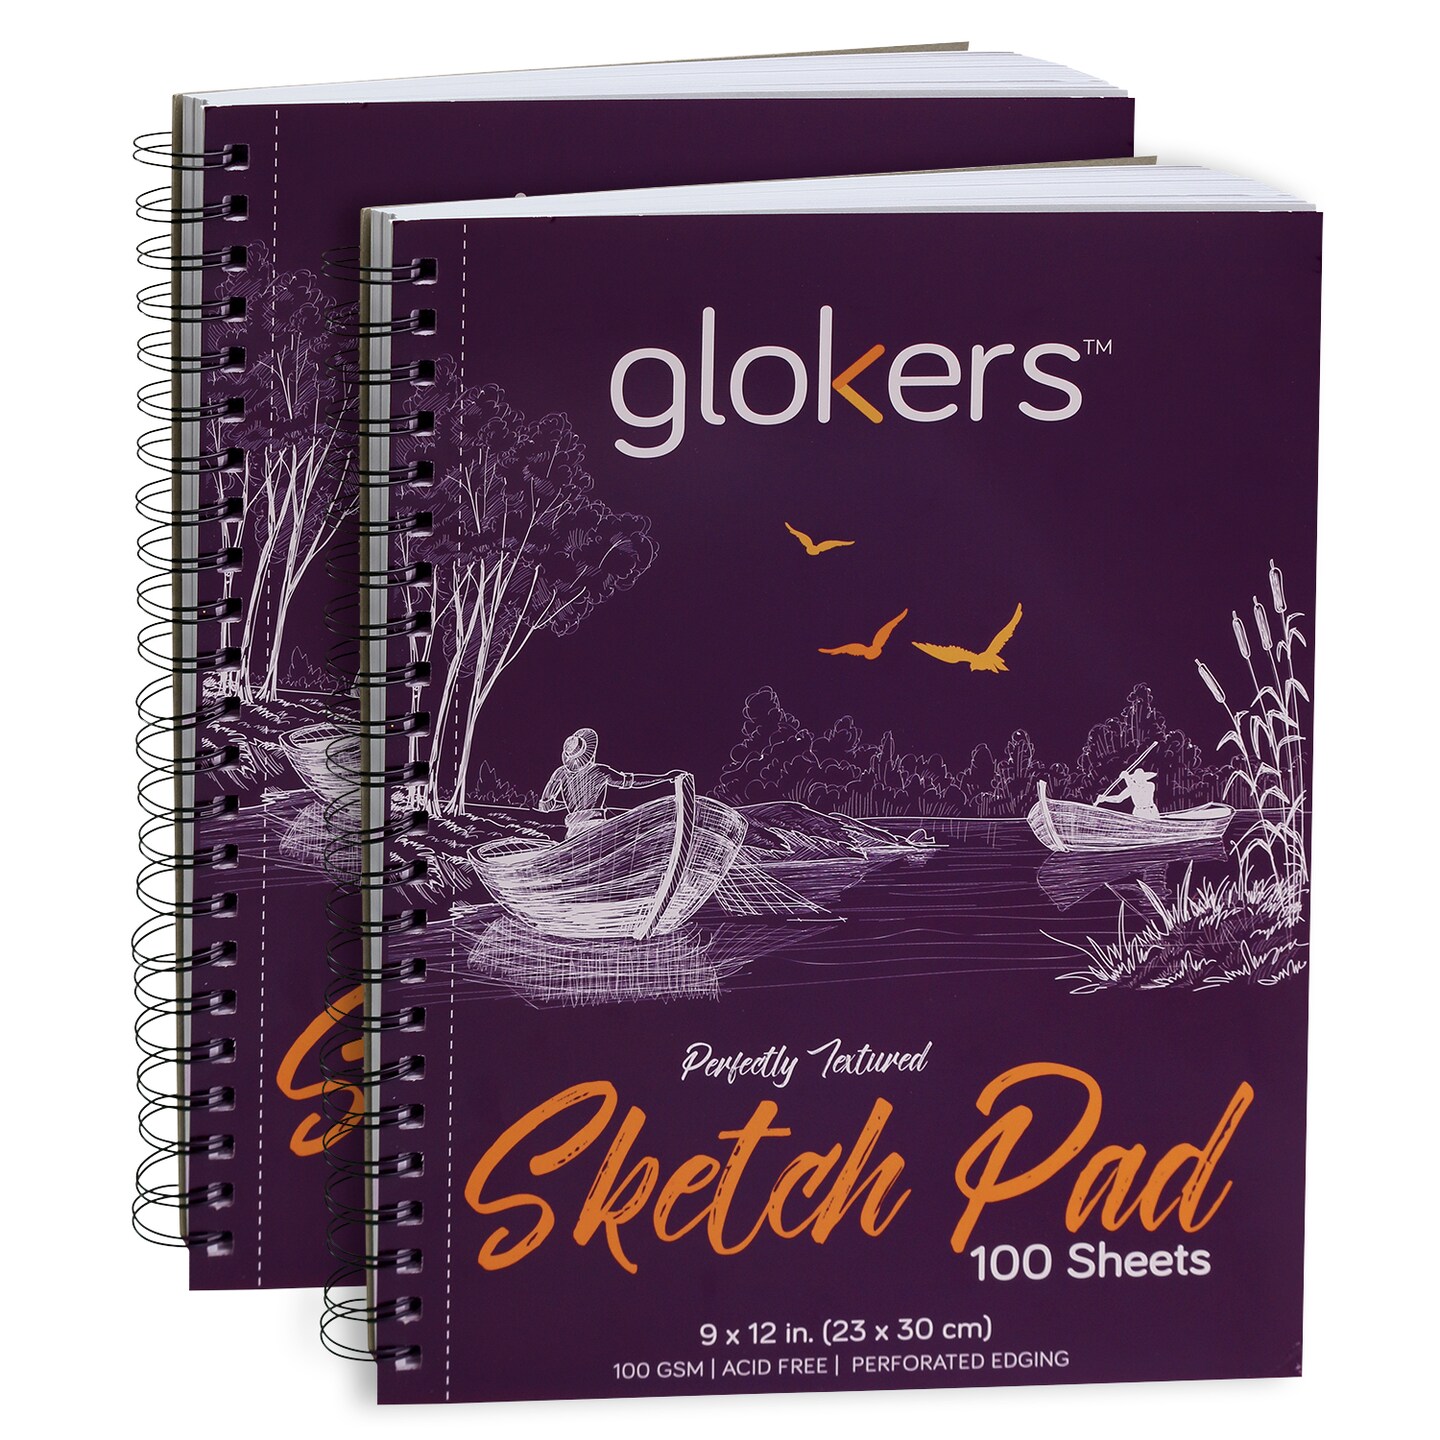 Sketch Book, Acid Free Drawing Papers, 100 Sheets, 2 pack, 9 x 12&#x201D; Inch, by Glokers